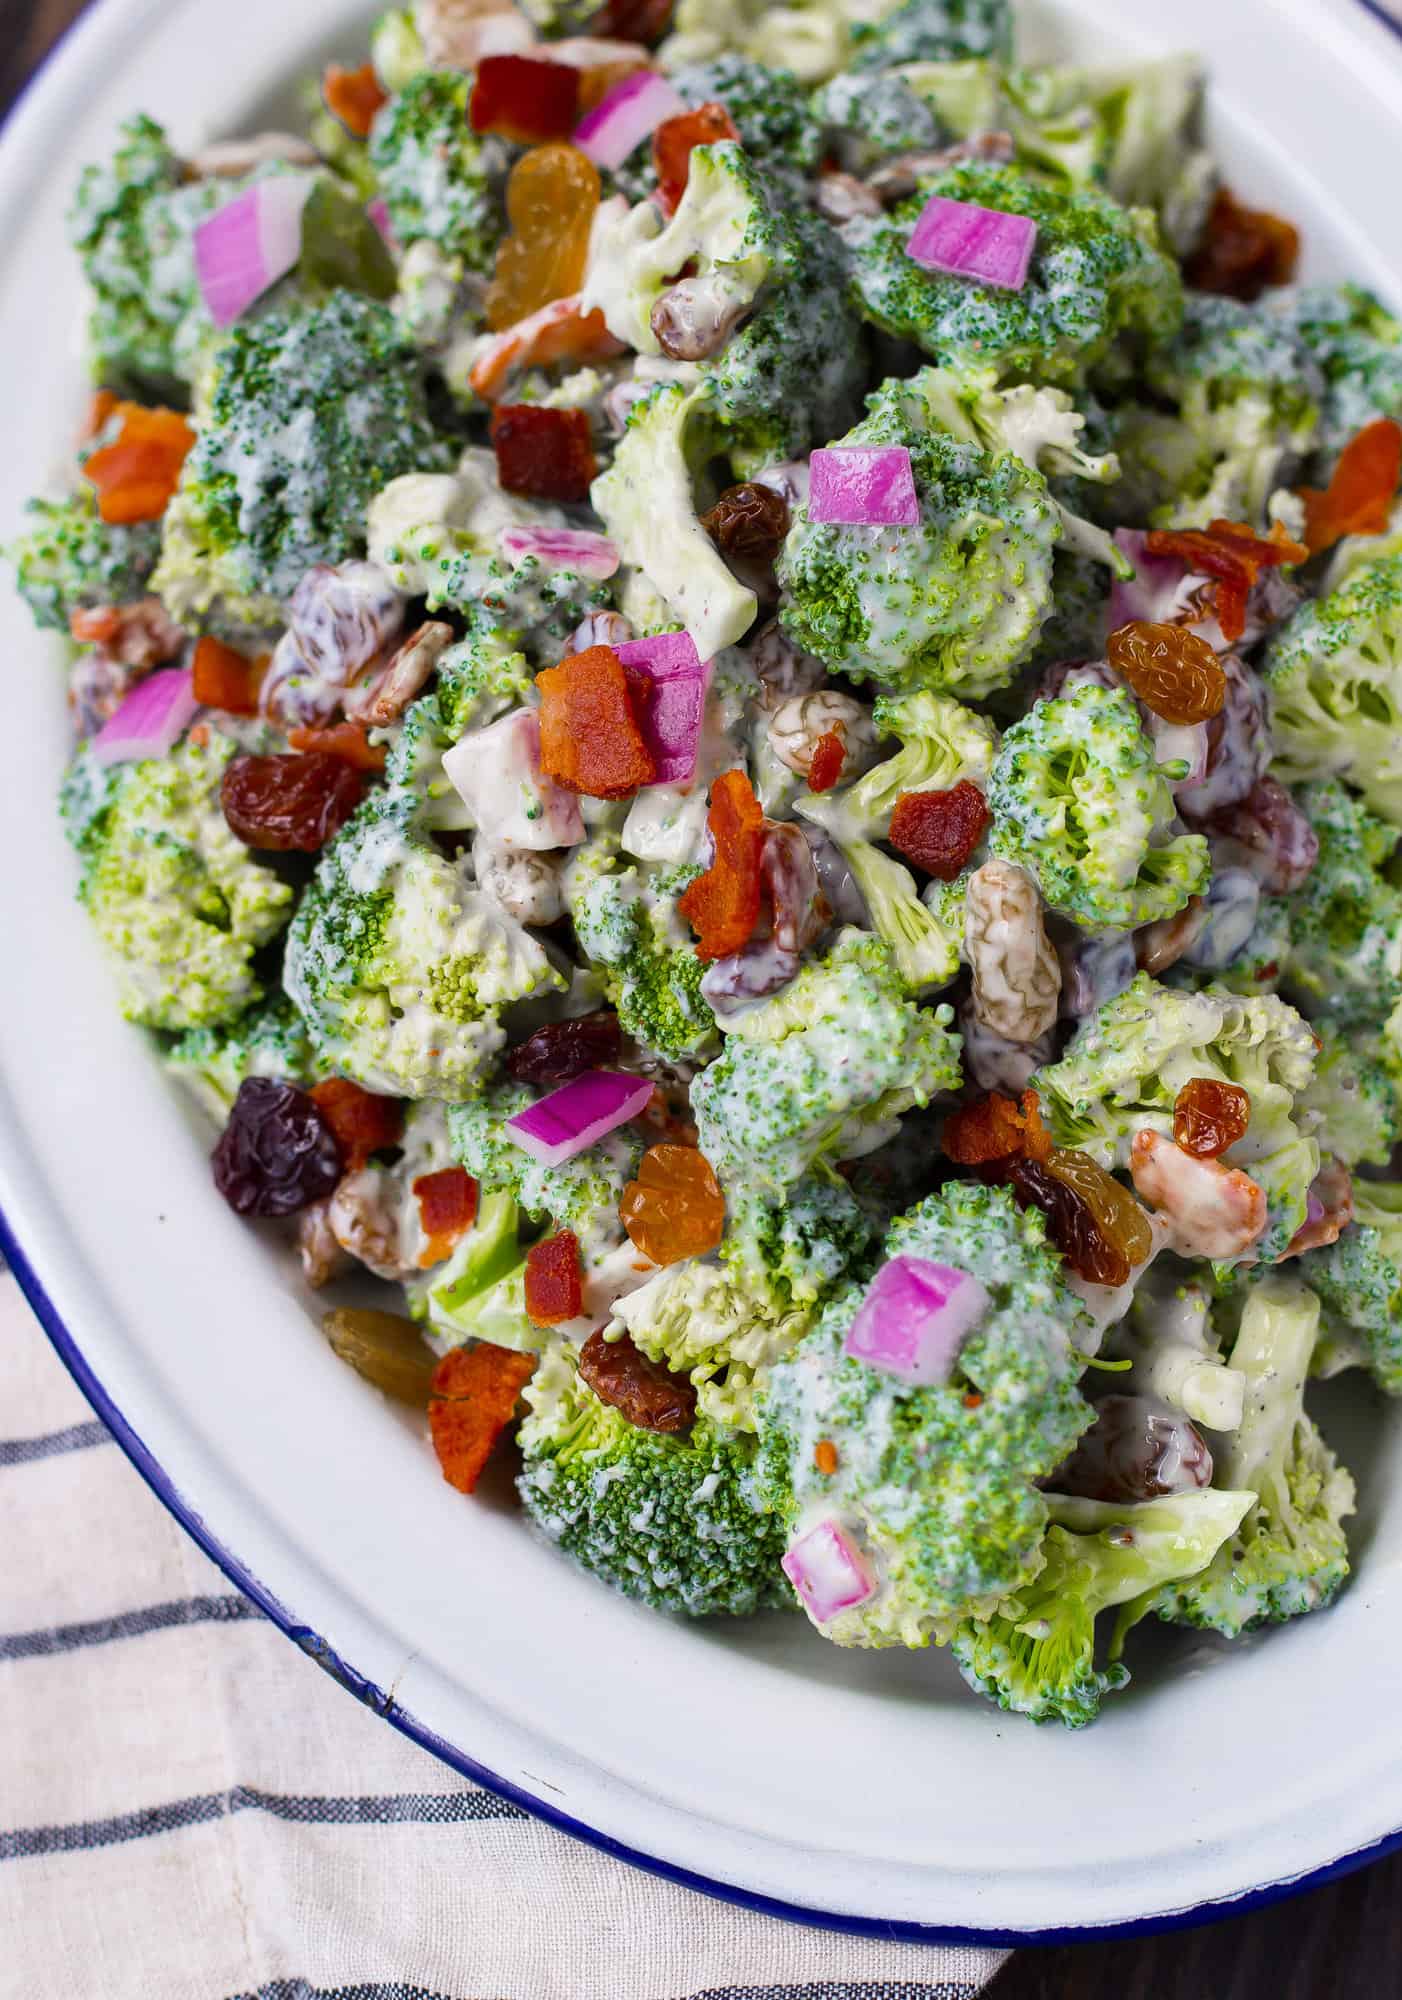 Broccoli salad on a blue and white plate.